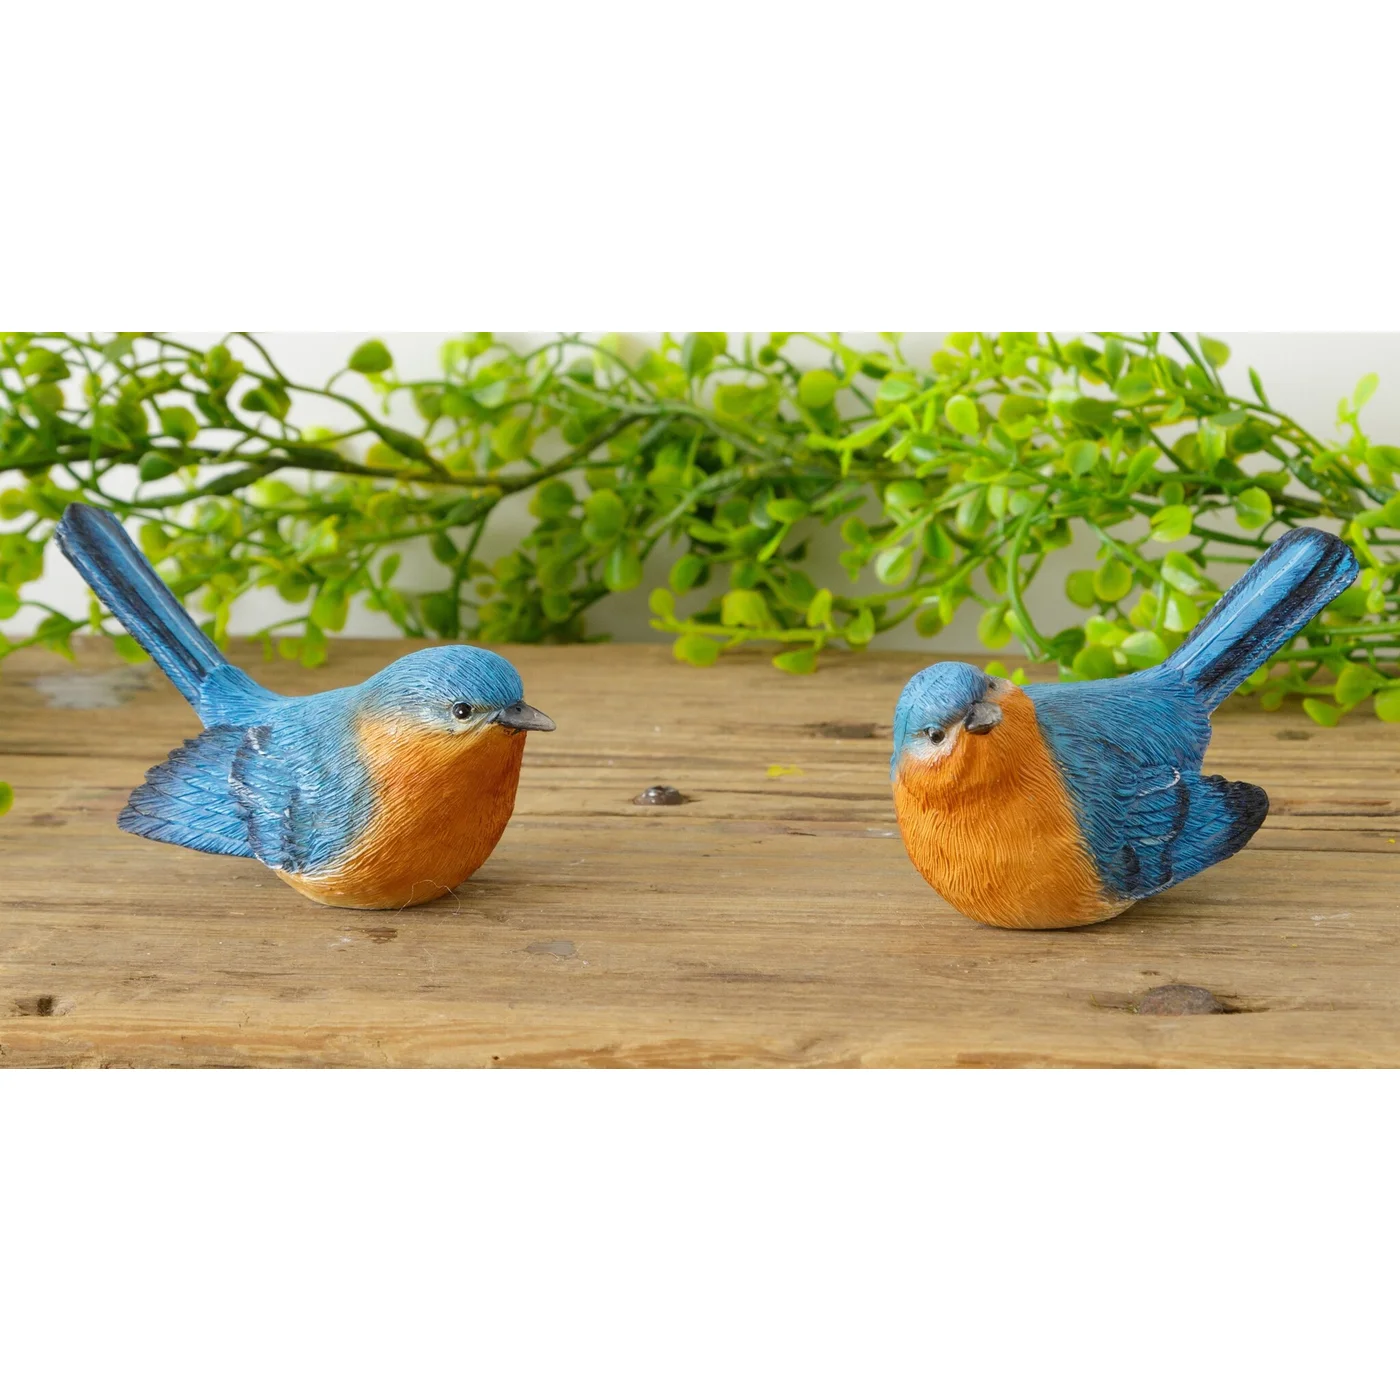 DAY 12 🐦 14 DAYS OF FEATHERED FRIENDS 🪺 Set of 2 Bluebird Resin Figurines